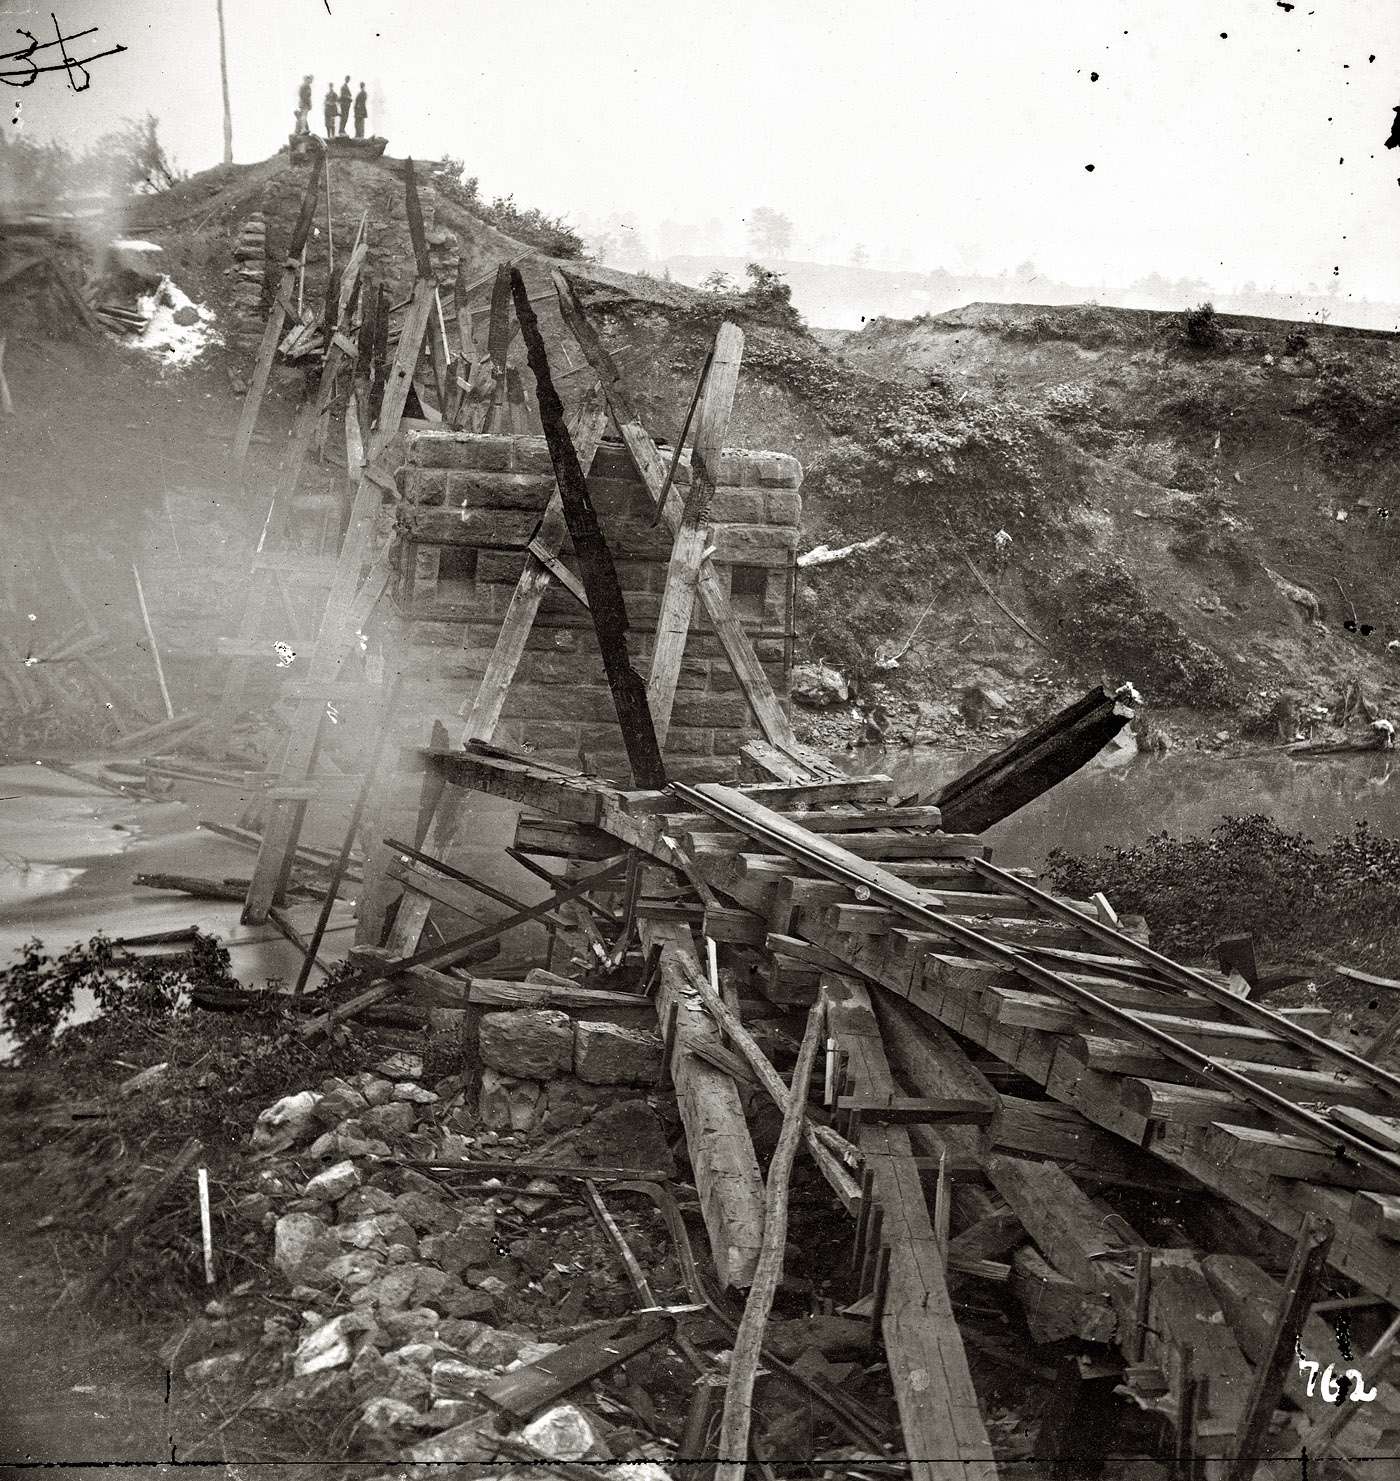 May 25, 1864. "North Anna River, Virginia. Destroyed bridge of the Richmond & Fredericksburg Railroad." Wet plate glass negative, left half of stereo pair, by Timothy H. O'Sullivan. Library of Congress. View full size.